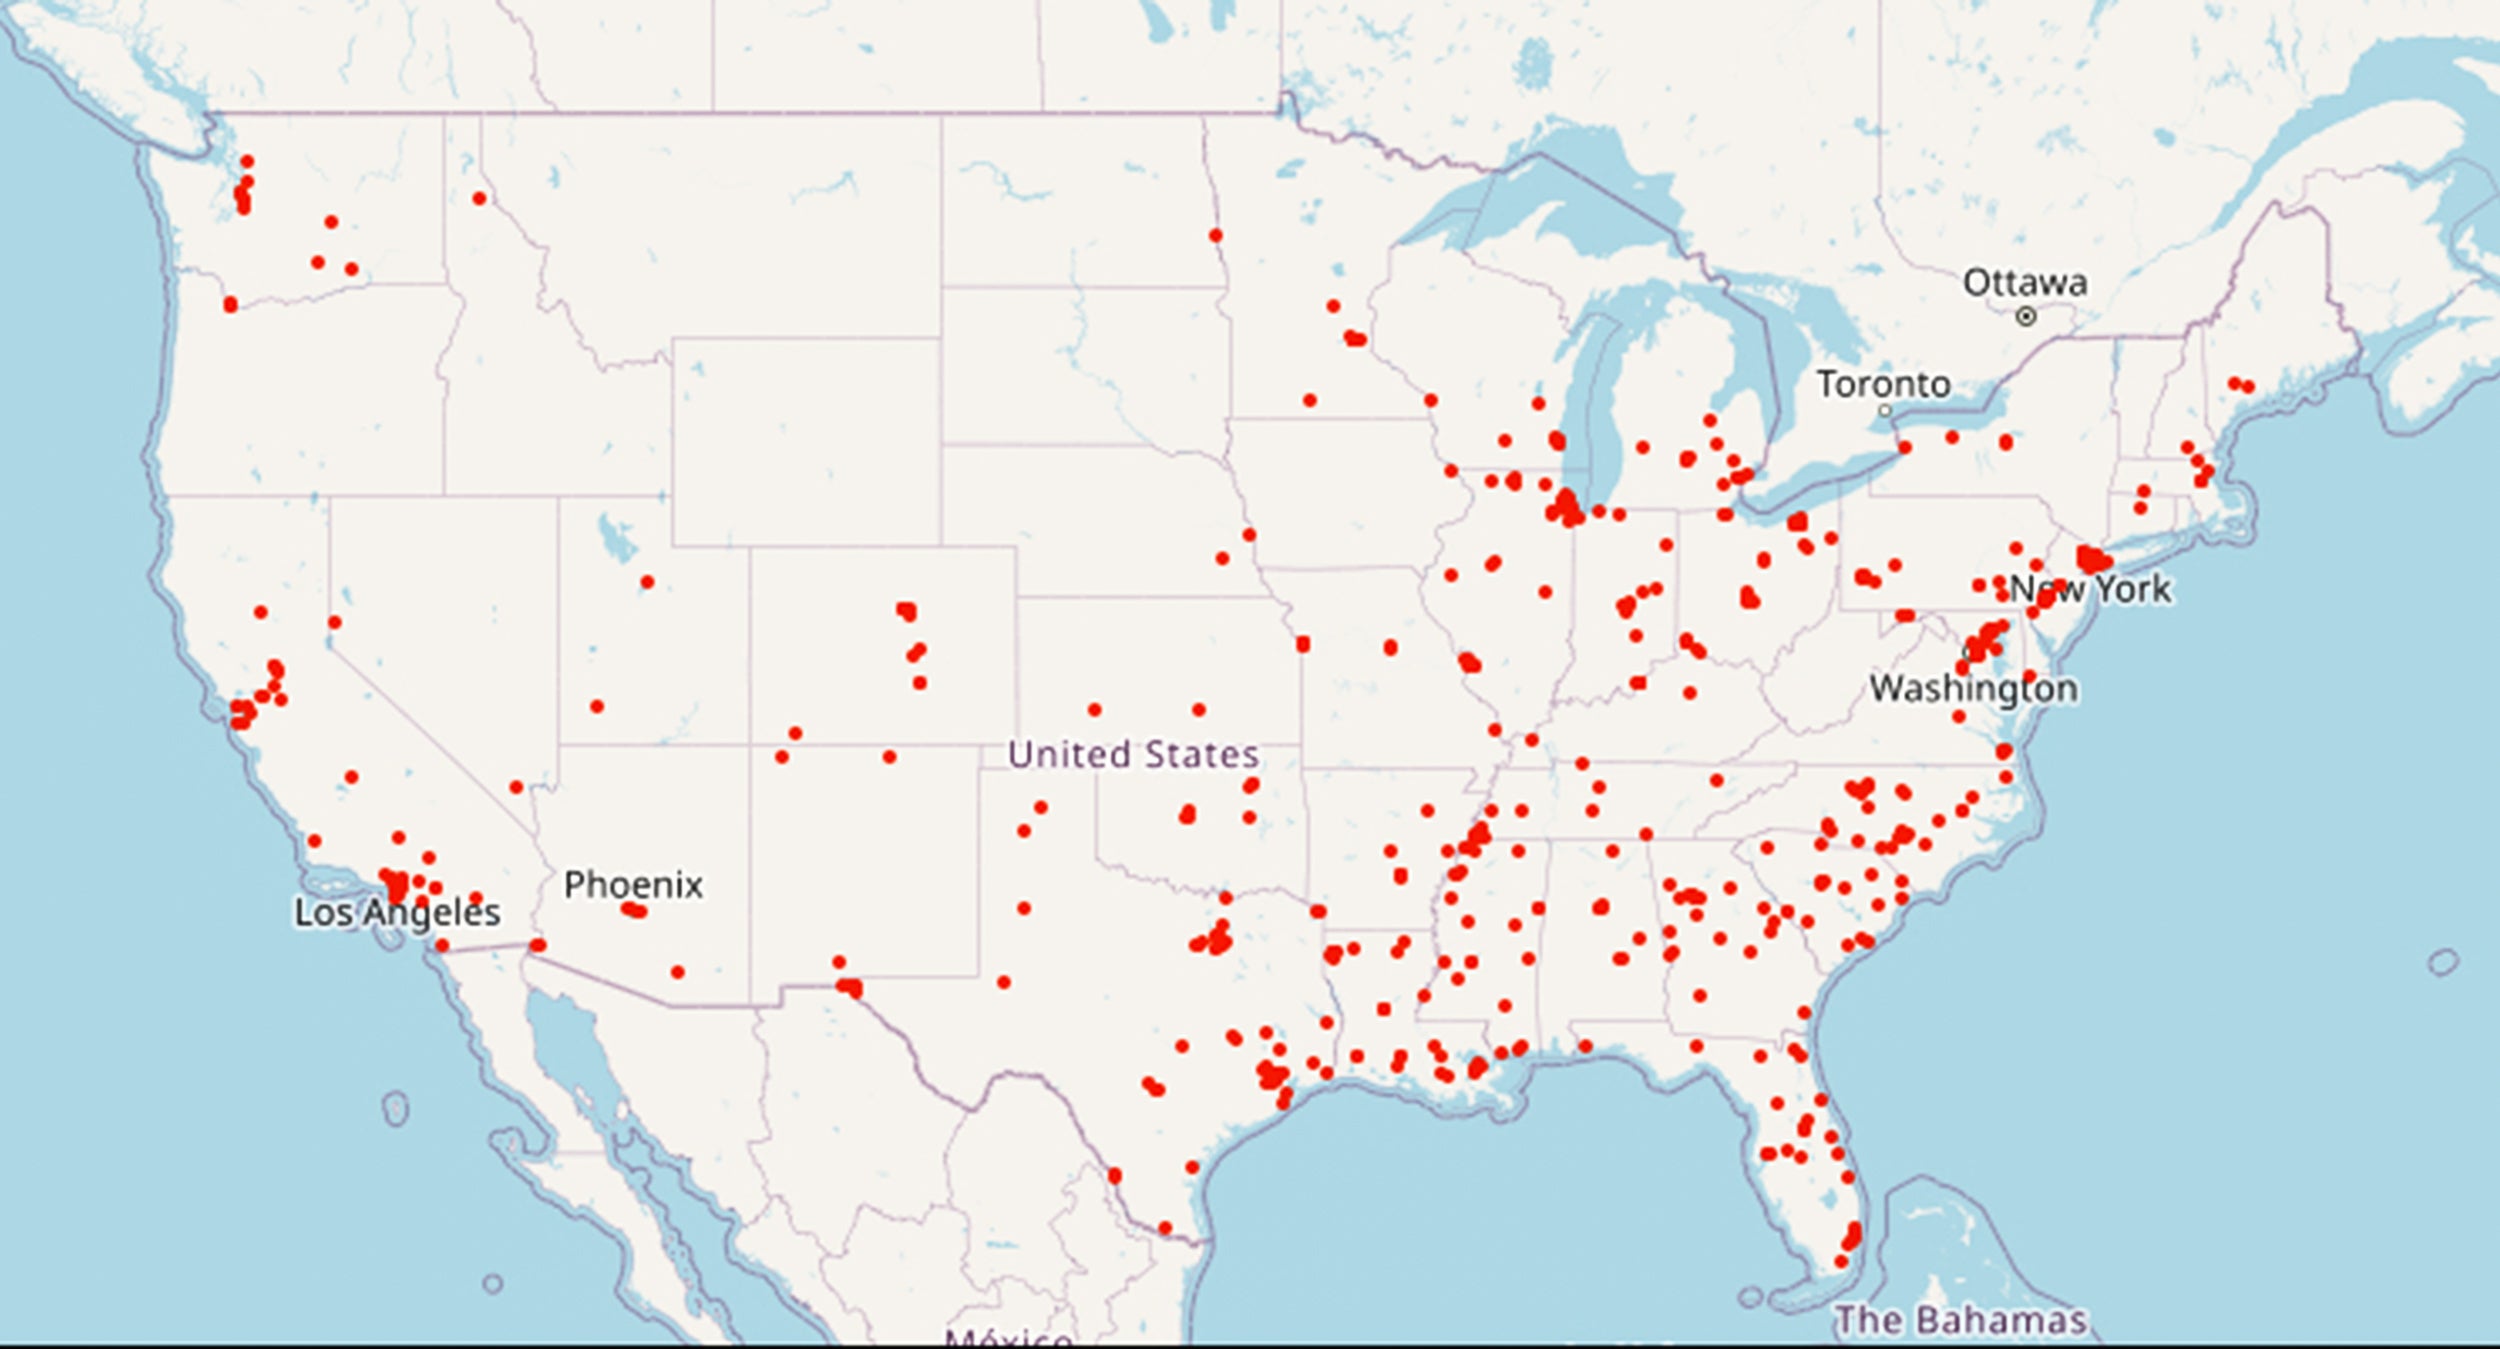 Map of U.S. shows locations of 565 mass shootings across country with heavy concentration in southeastern U.S. and major cities.